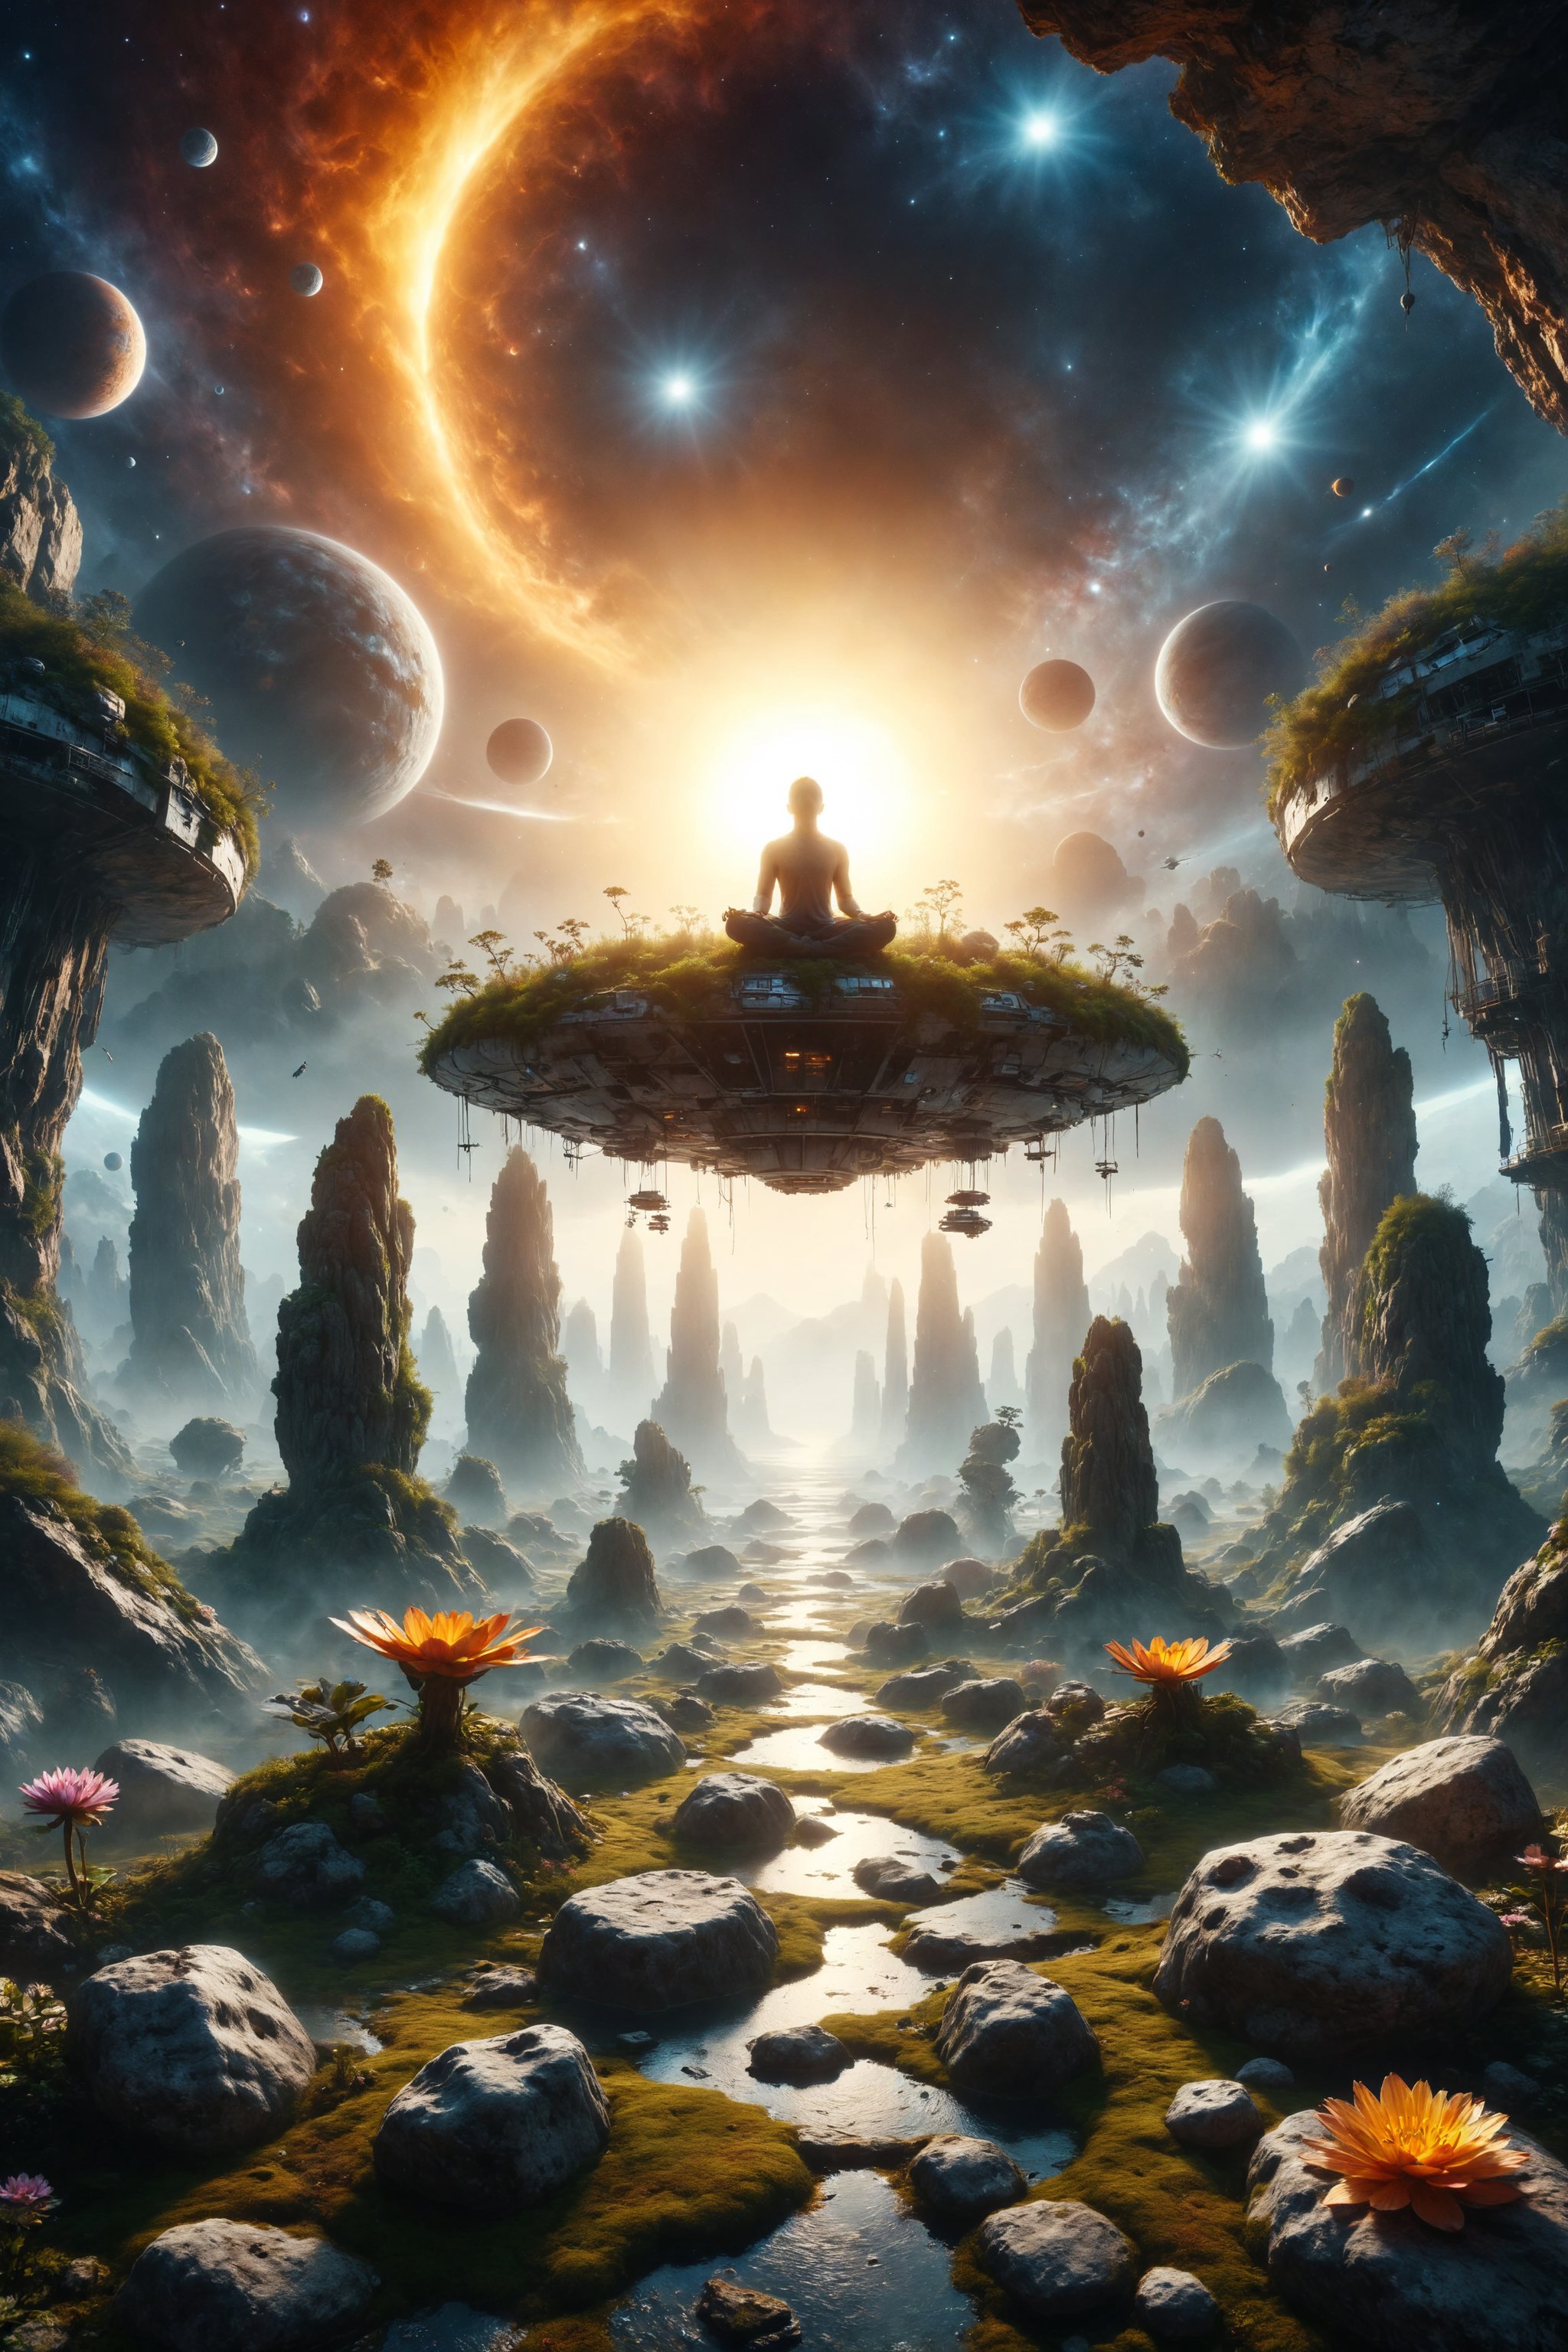 Design a scene of a person meditating in a rock garden on a floating space station near the sun.